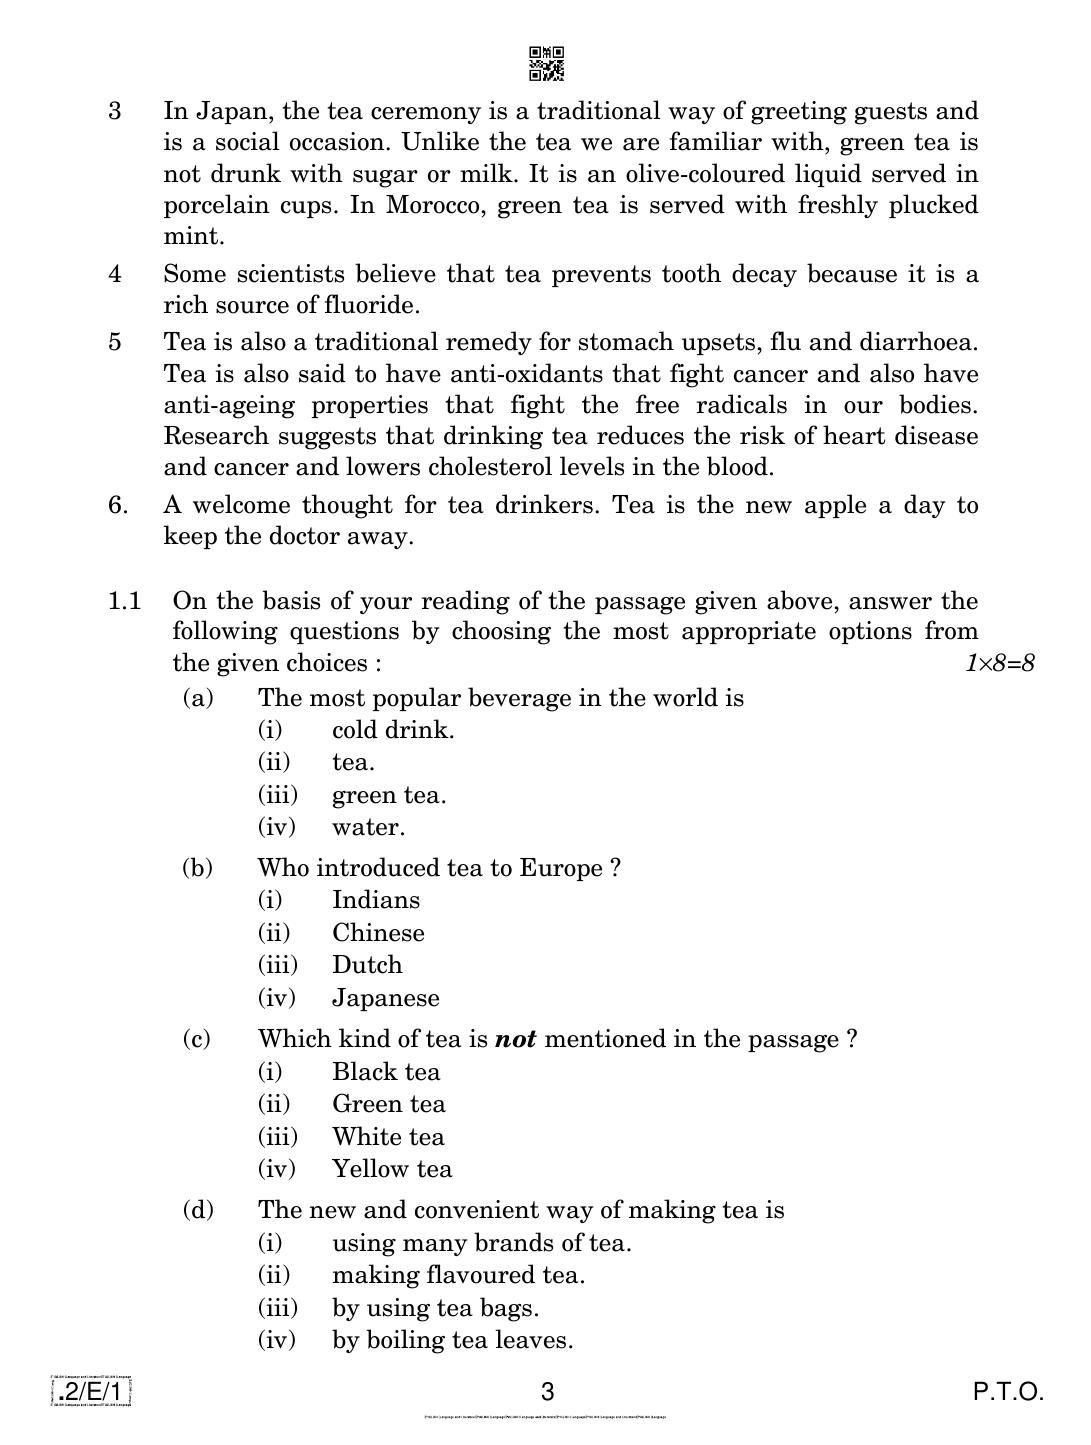 CBSE Class 10 2-C-1 Eng Lang. And Literature 2020 Compartment Question Paper - Page 3